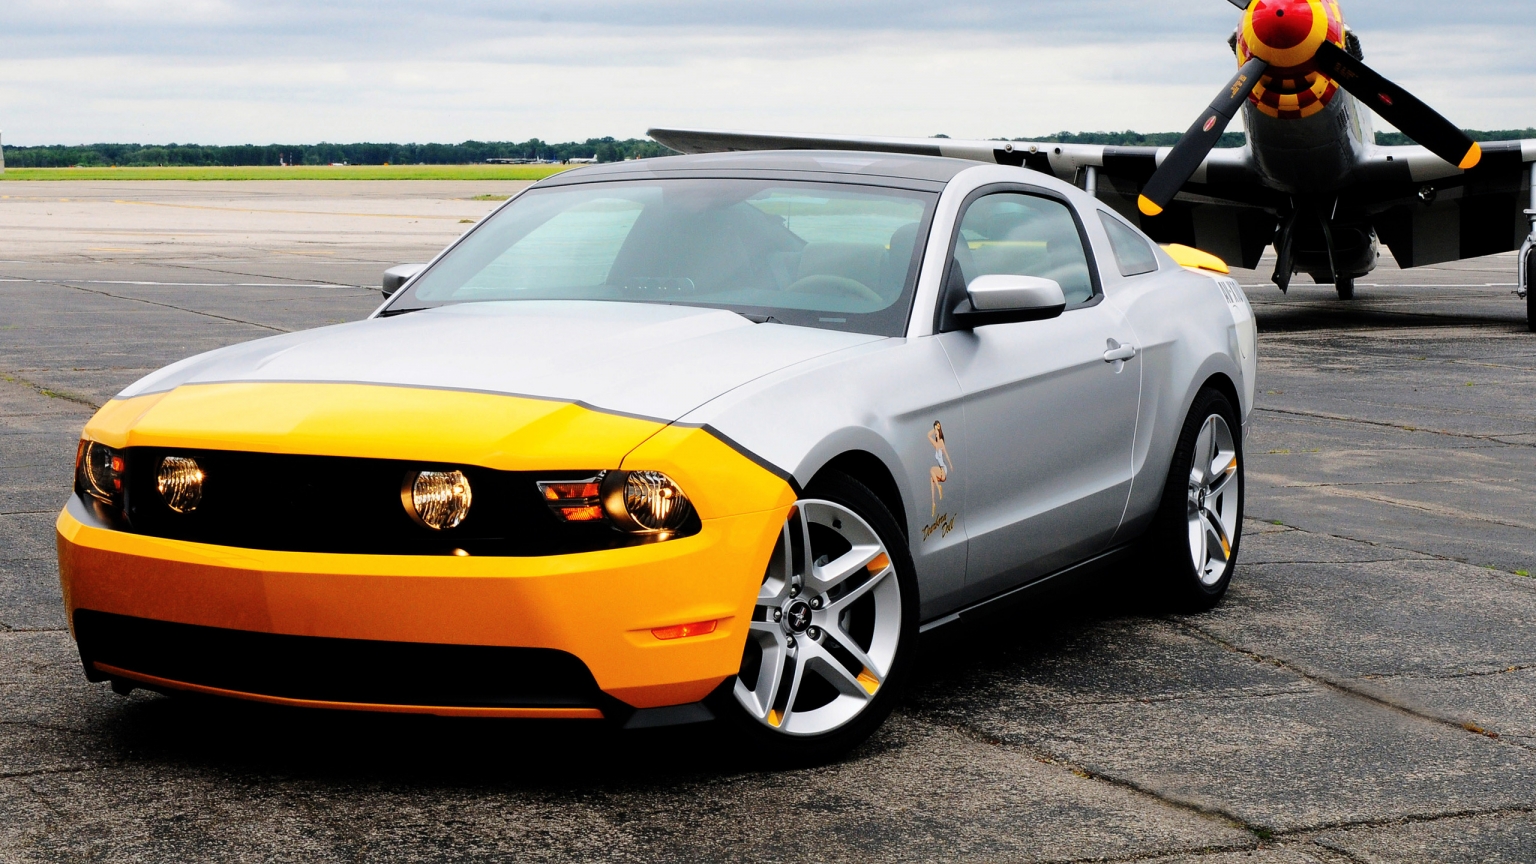 Ford Mustang Dearborn Doll for 1536 x 864 HDTV resolution